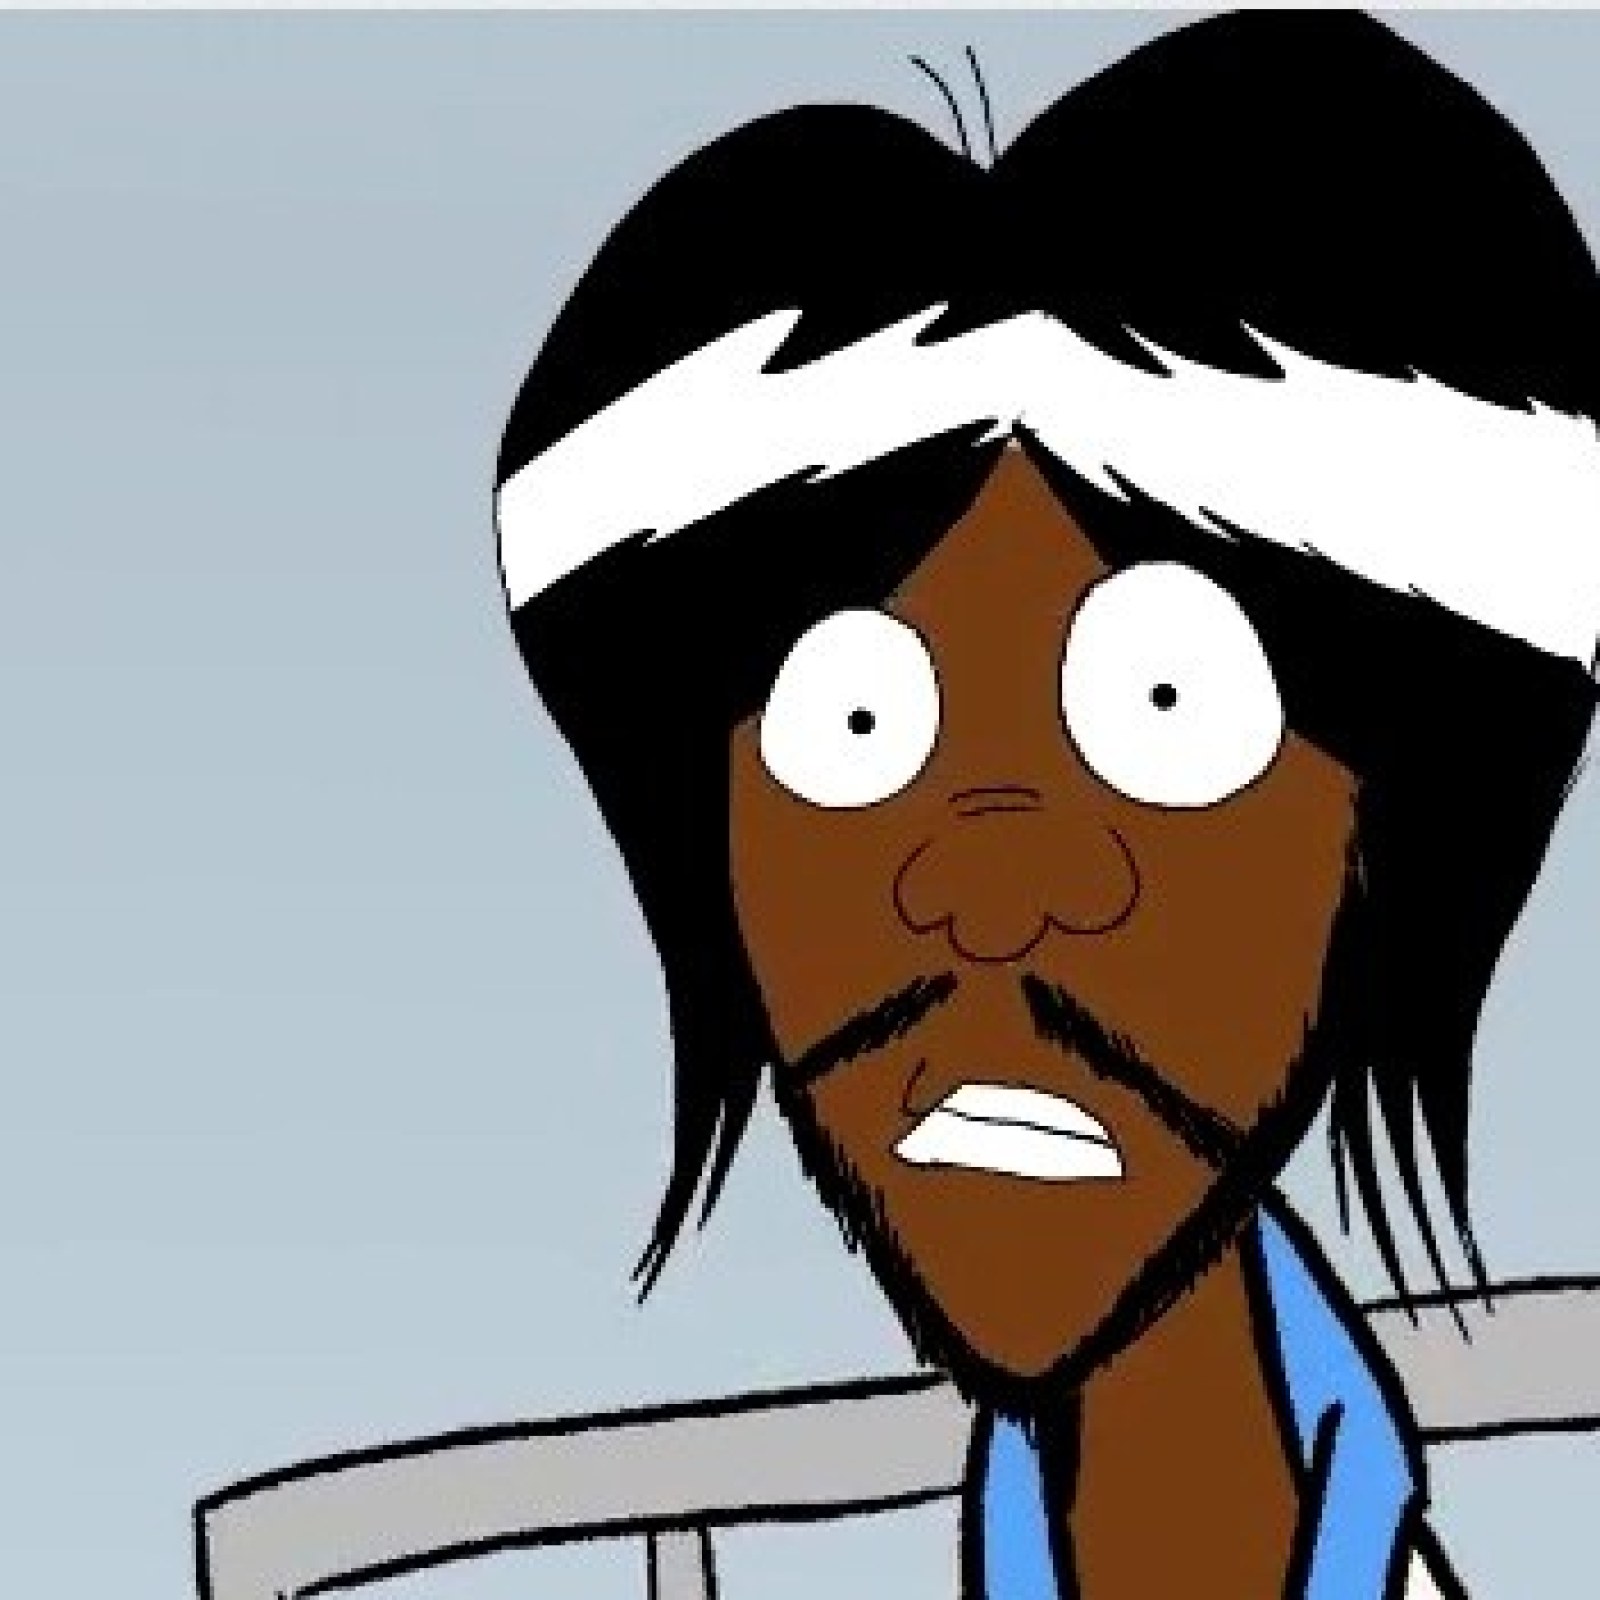 Suicidal' Black Jesus Cartoon Provokes Outrage in South Africa